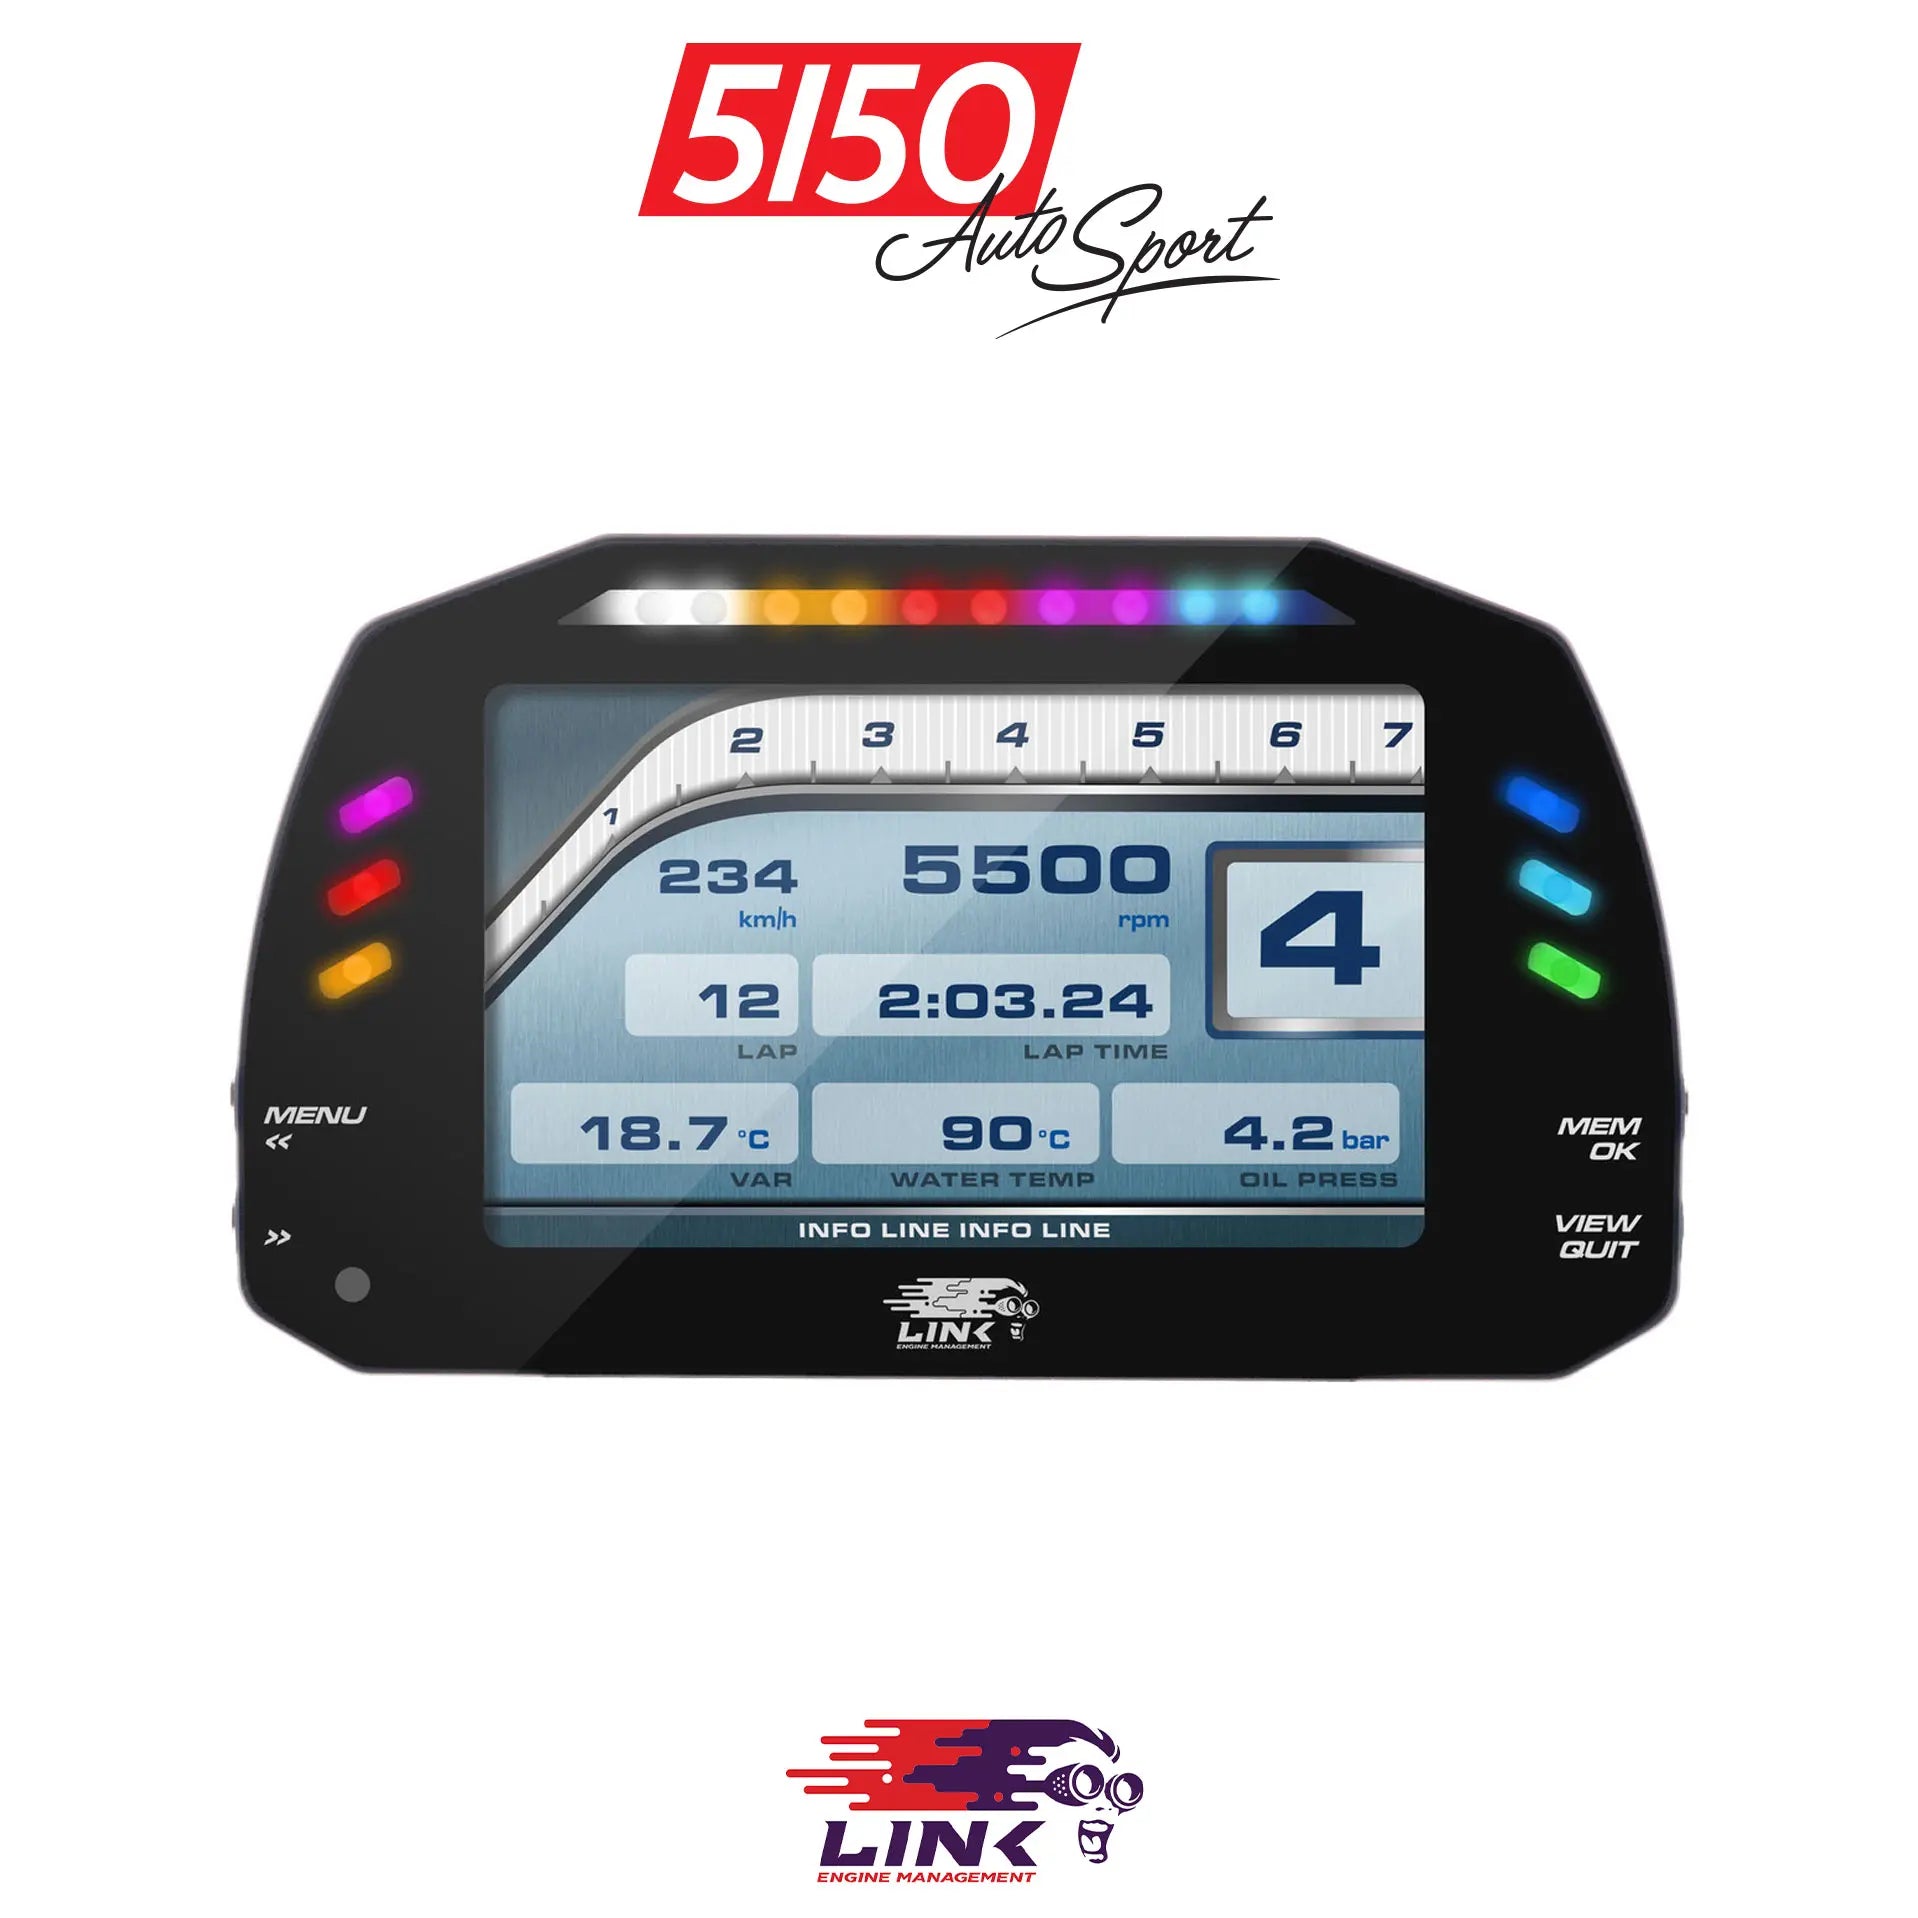 Link Engine Management 5inch Race Edition Driver Dash Display